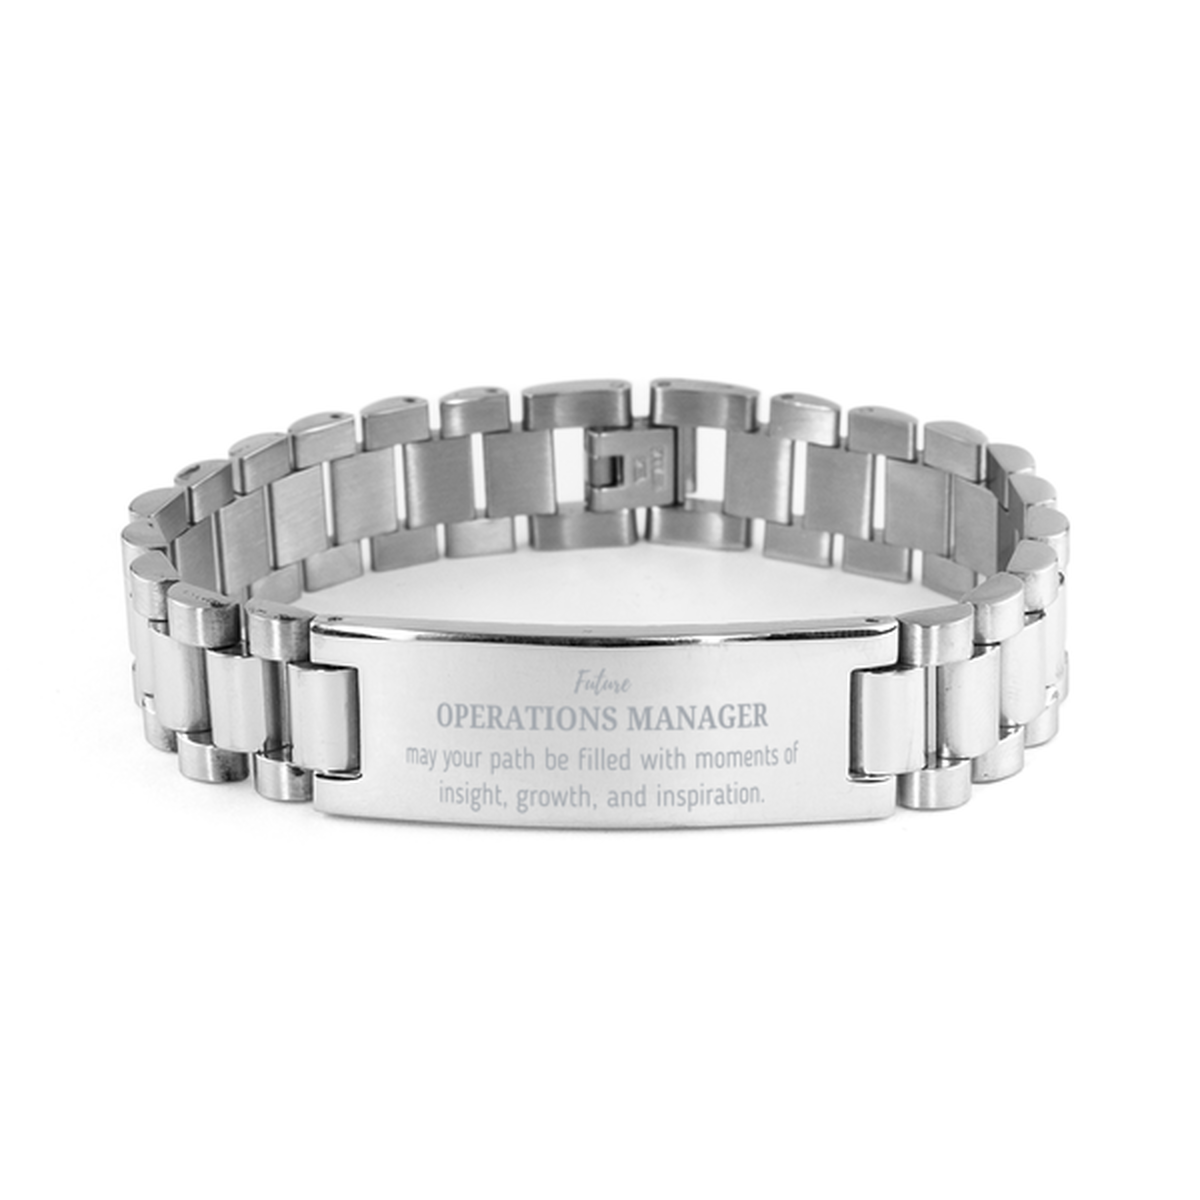 Future Operations Manager Gifts, May your path be filled with moments of insight, Graduation Gifts for New Operations Manager, Christmas Unique Ladder Stainless Steel Bracelet For Men, Women, Friends